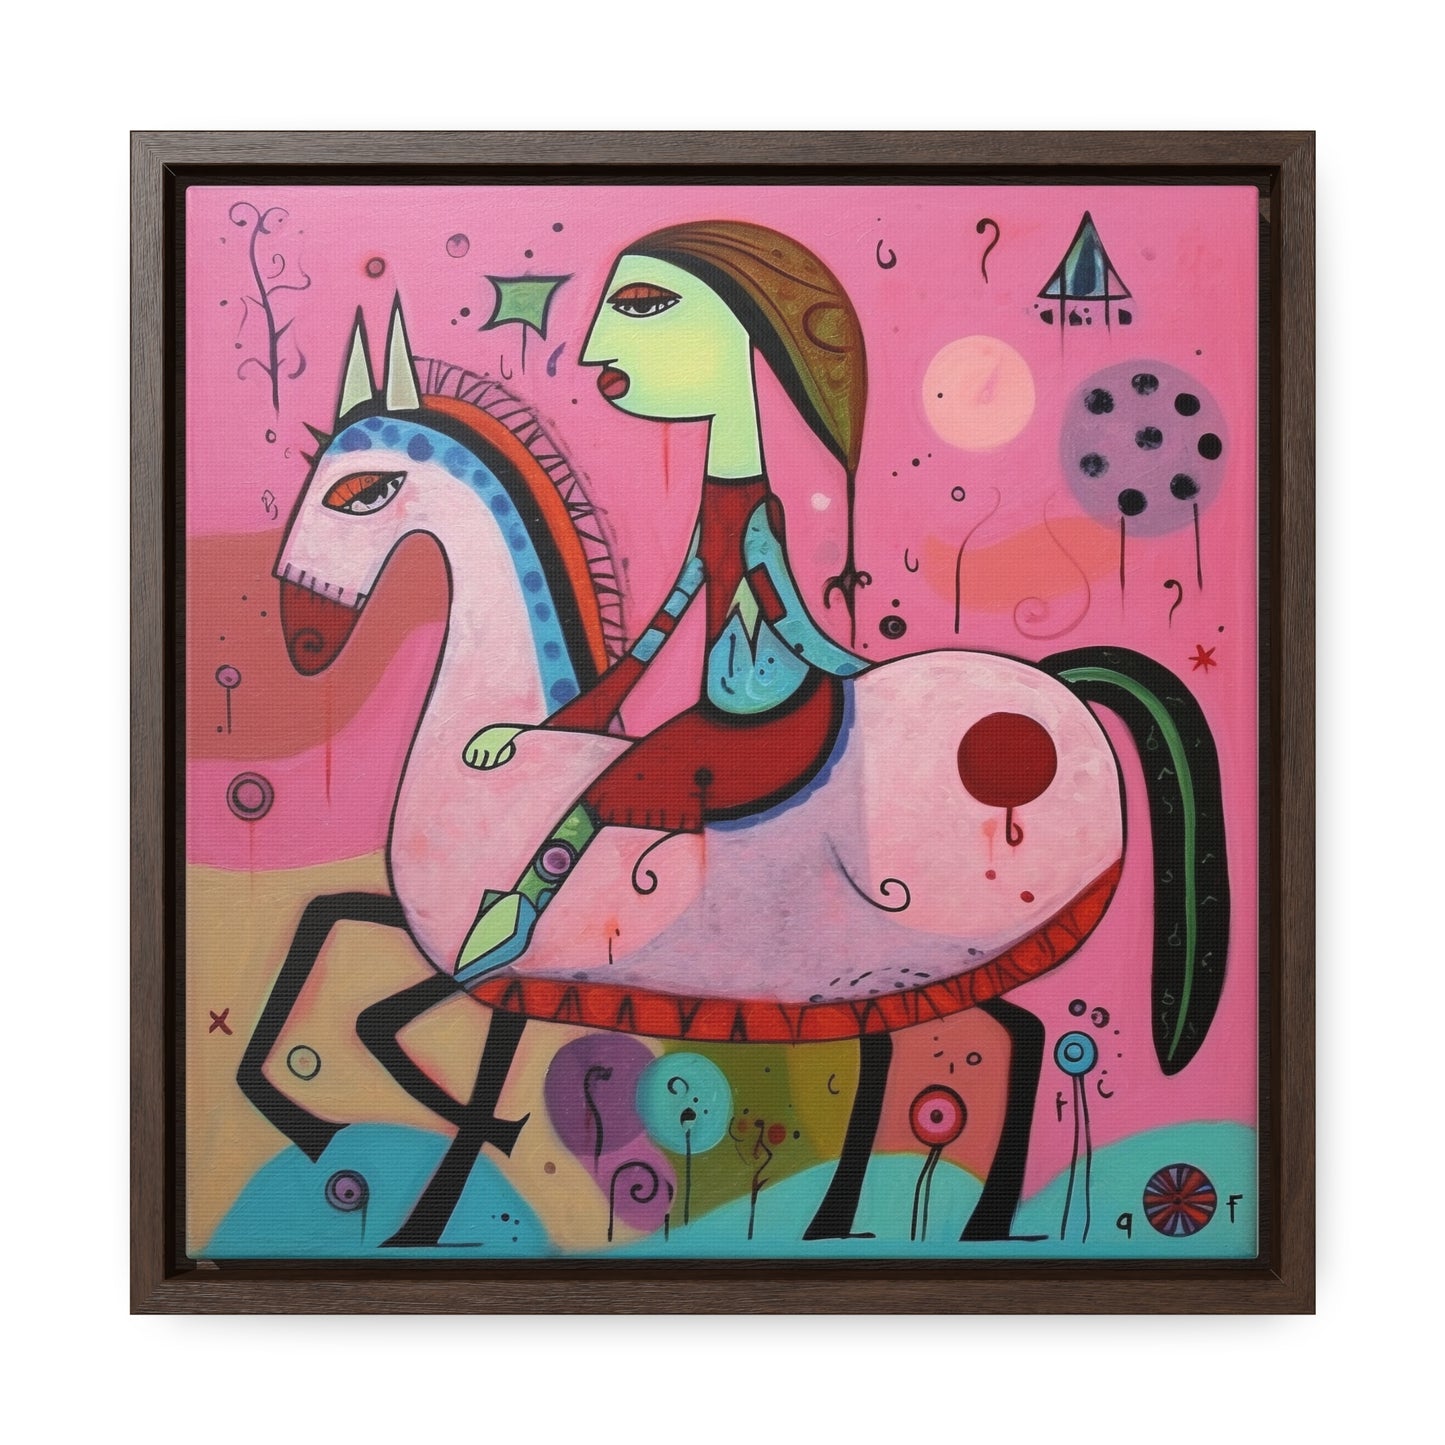 The Dreams of the Child 9, Gallery Canvas Wraps, Square Frame